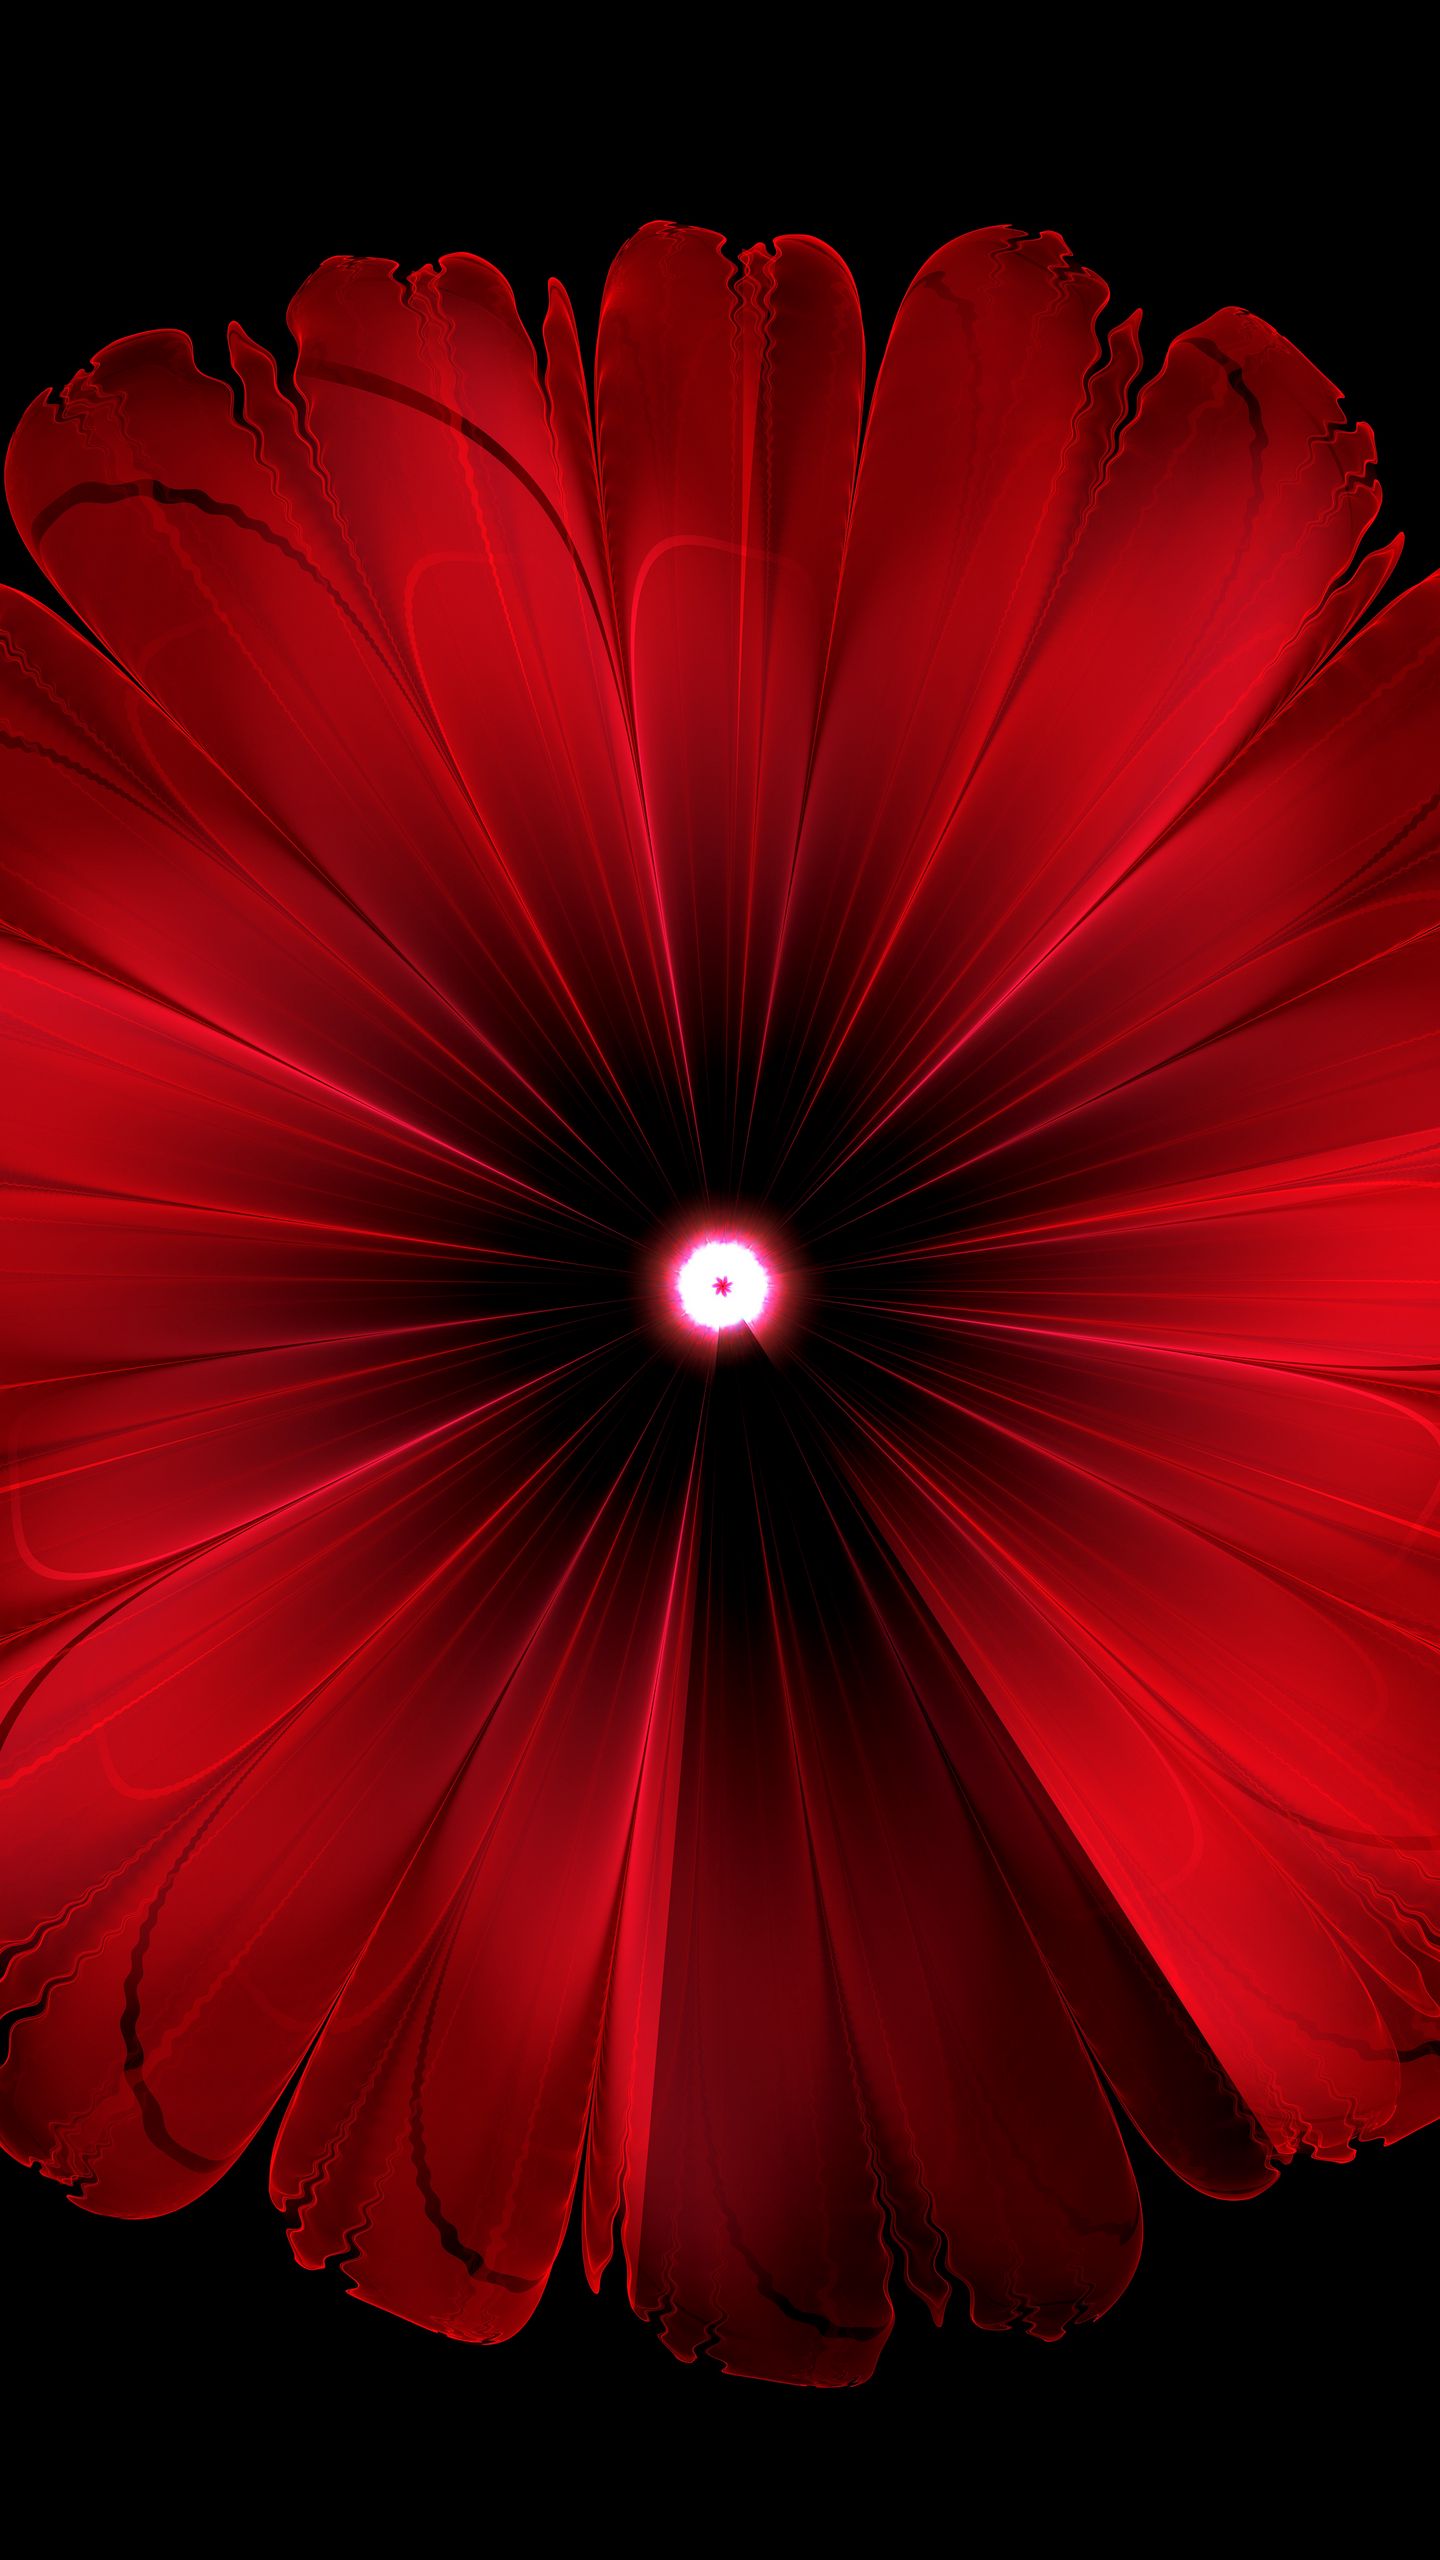 Download wallpaper 1440x2560 flower, red, glow, fractal, digital,  abstraction qhd samsung galaxy s6, s7, edge, note, lg g4 hd background